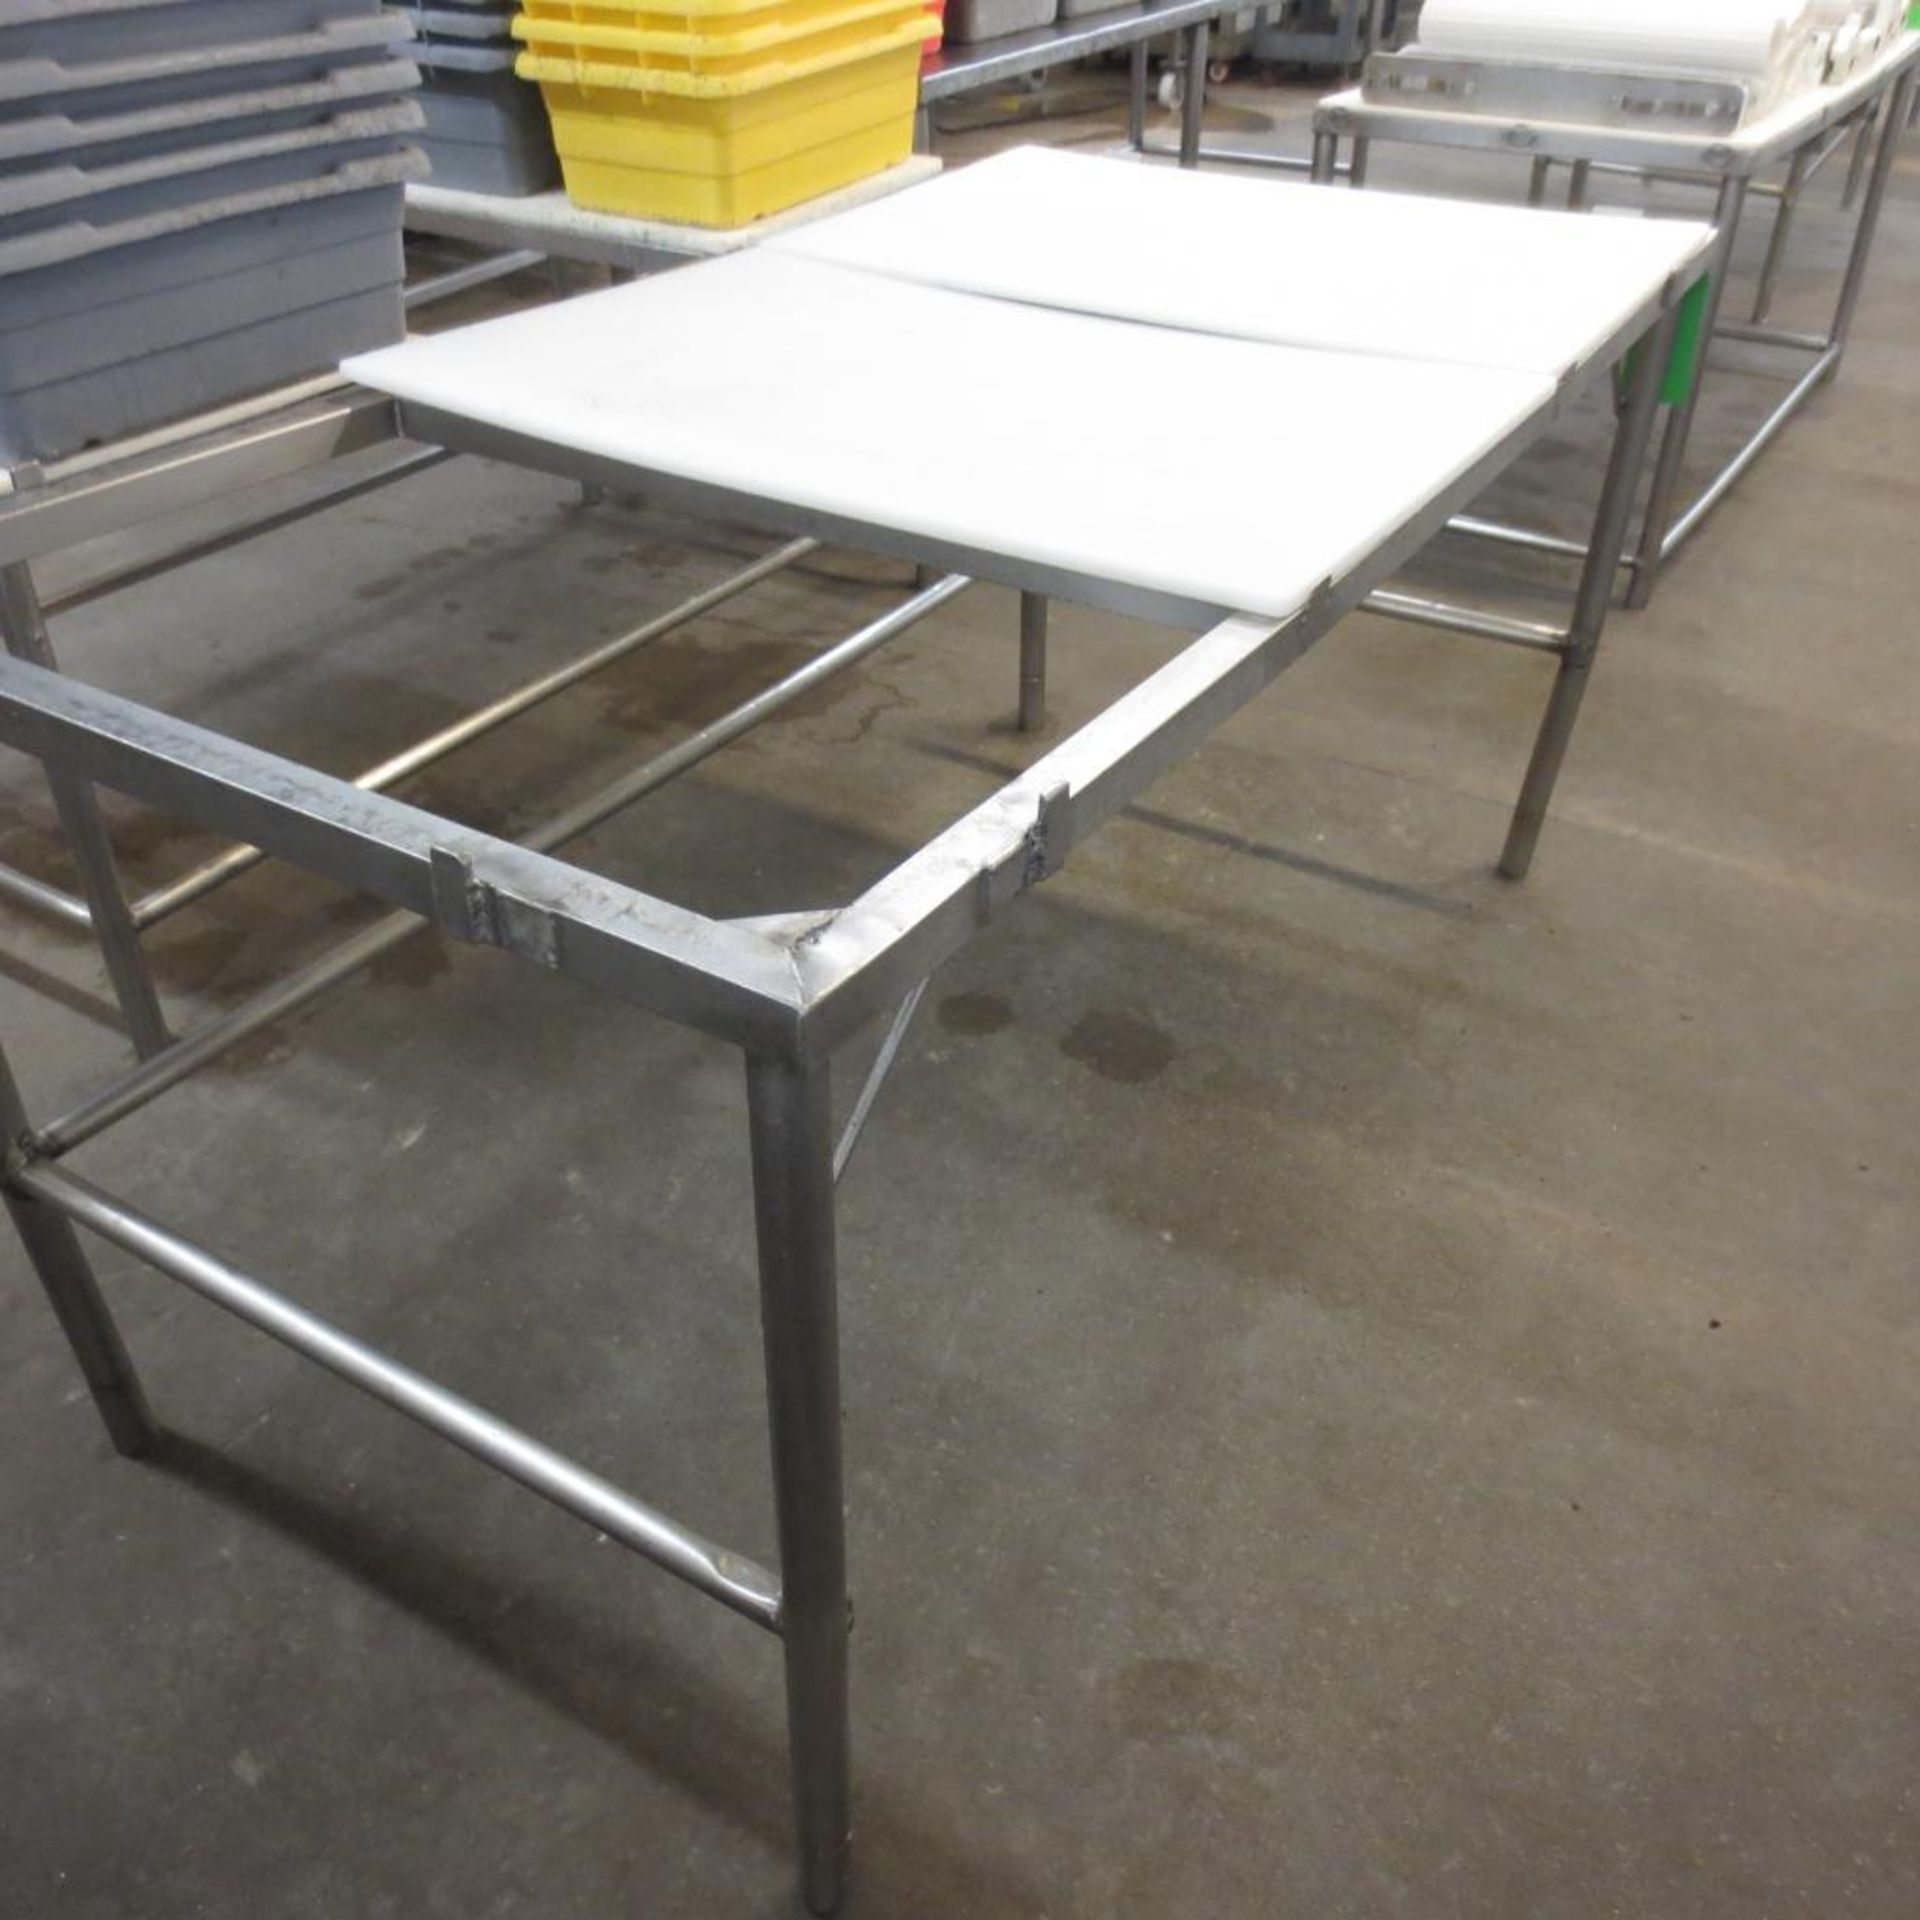 72" X 36" Stainless Table Frame with (2) 36" X 24" Cutting Board Table Tops - Image 2 of 2